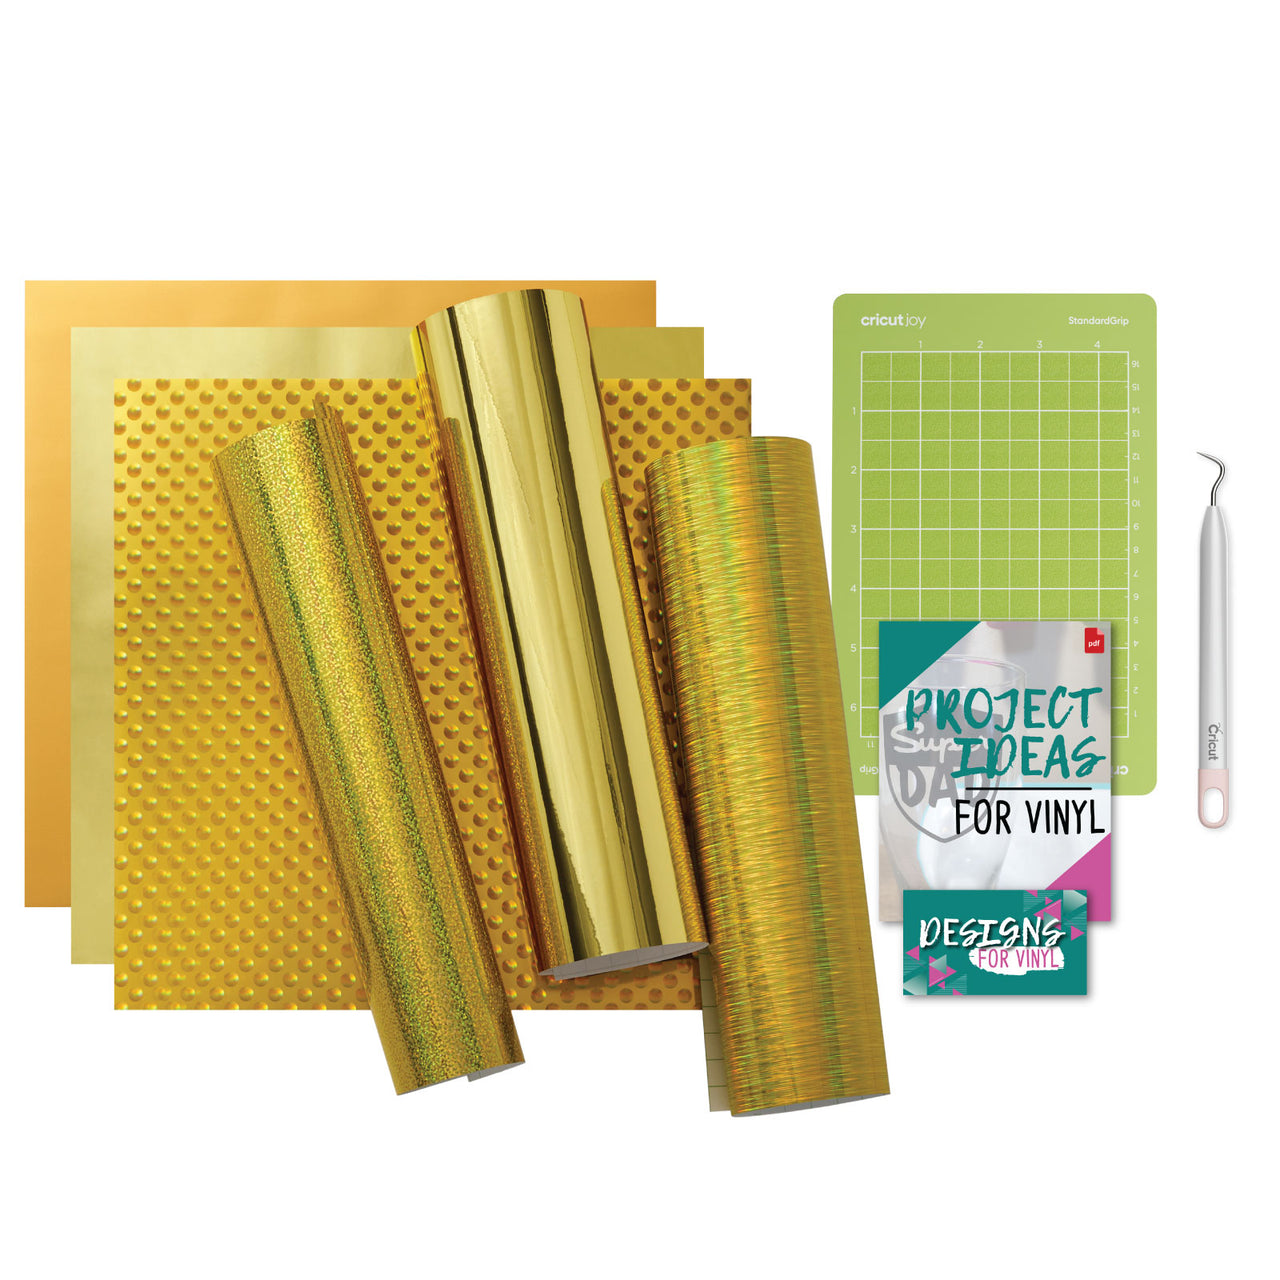 Cricut Holographic Gold Permanent Vinyl 6ct with Joy Standard Grip Mat and Weeder Tool Bundle